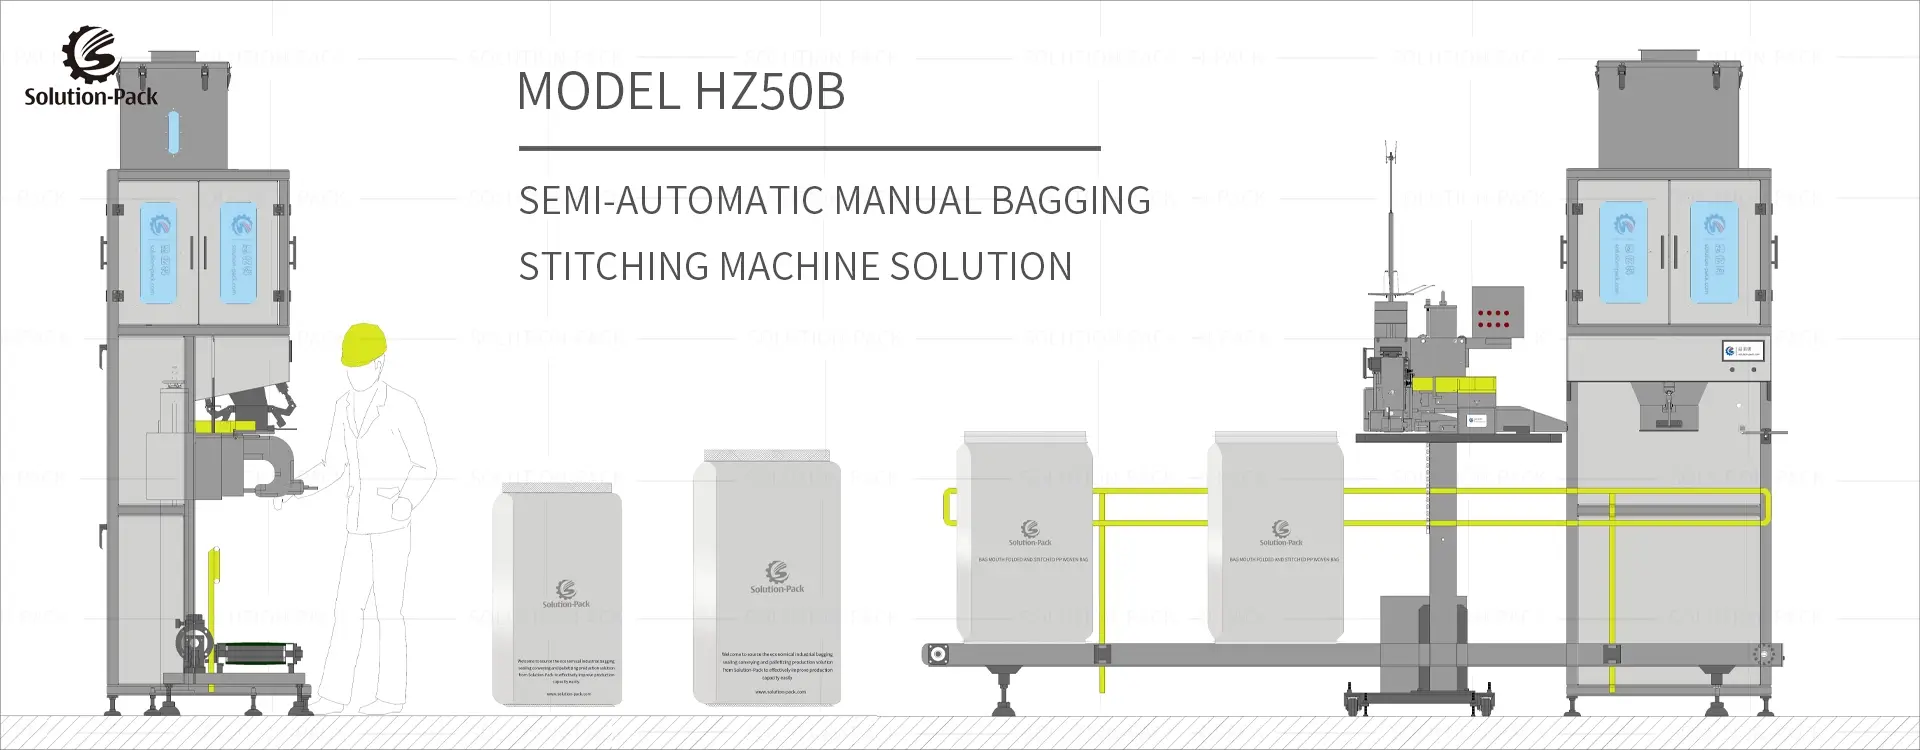 Model HZ50B Semi-Automatic Manual Bagging Machine Equipment Heading Banner Picture | Solution-Pack